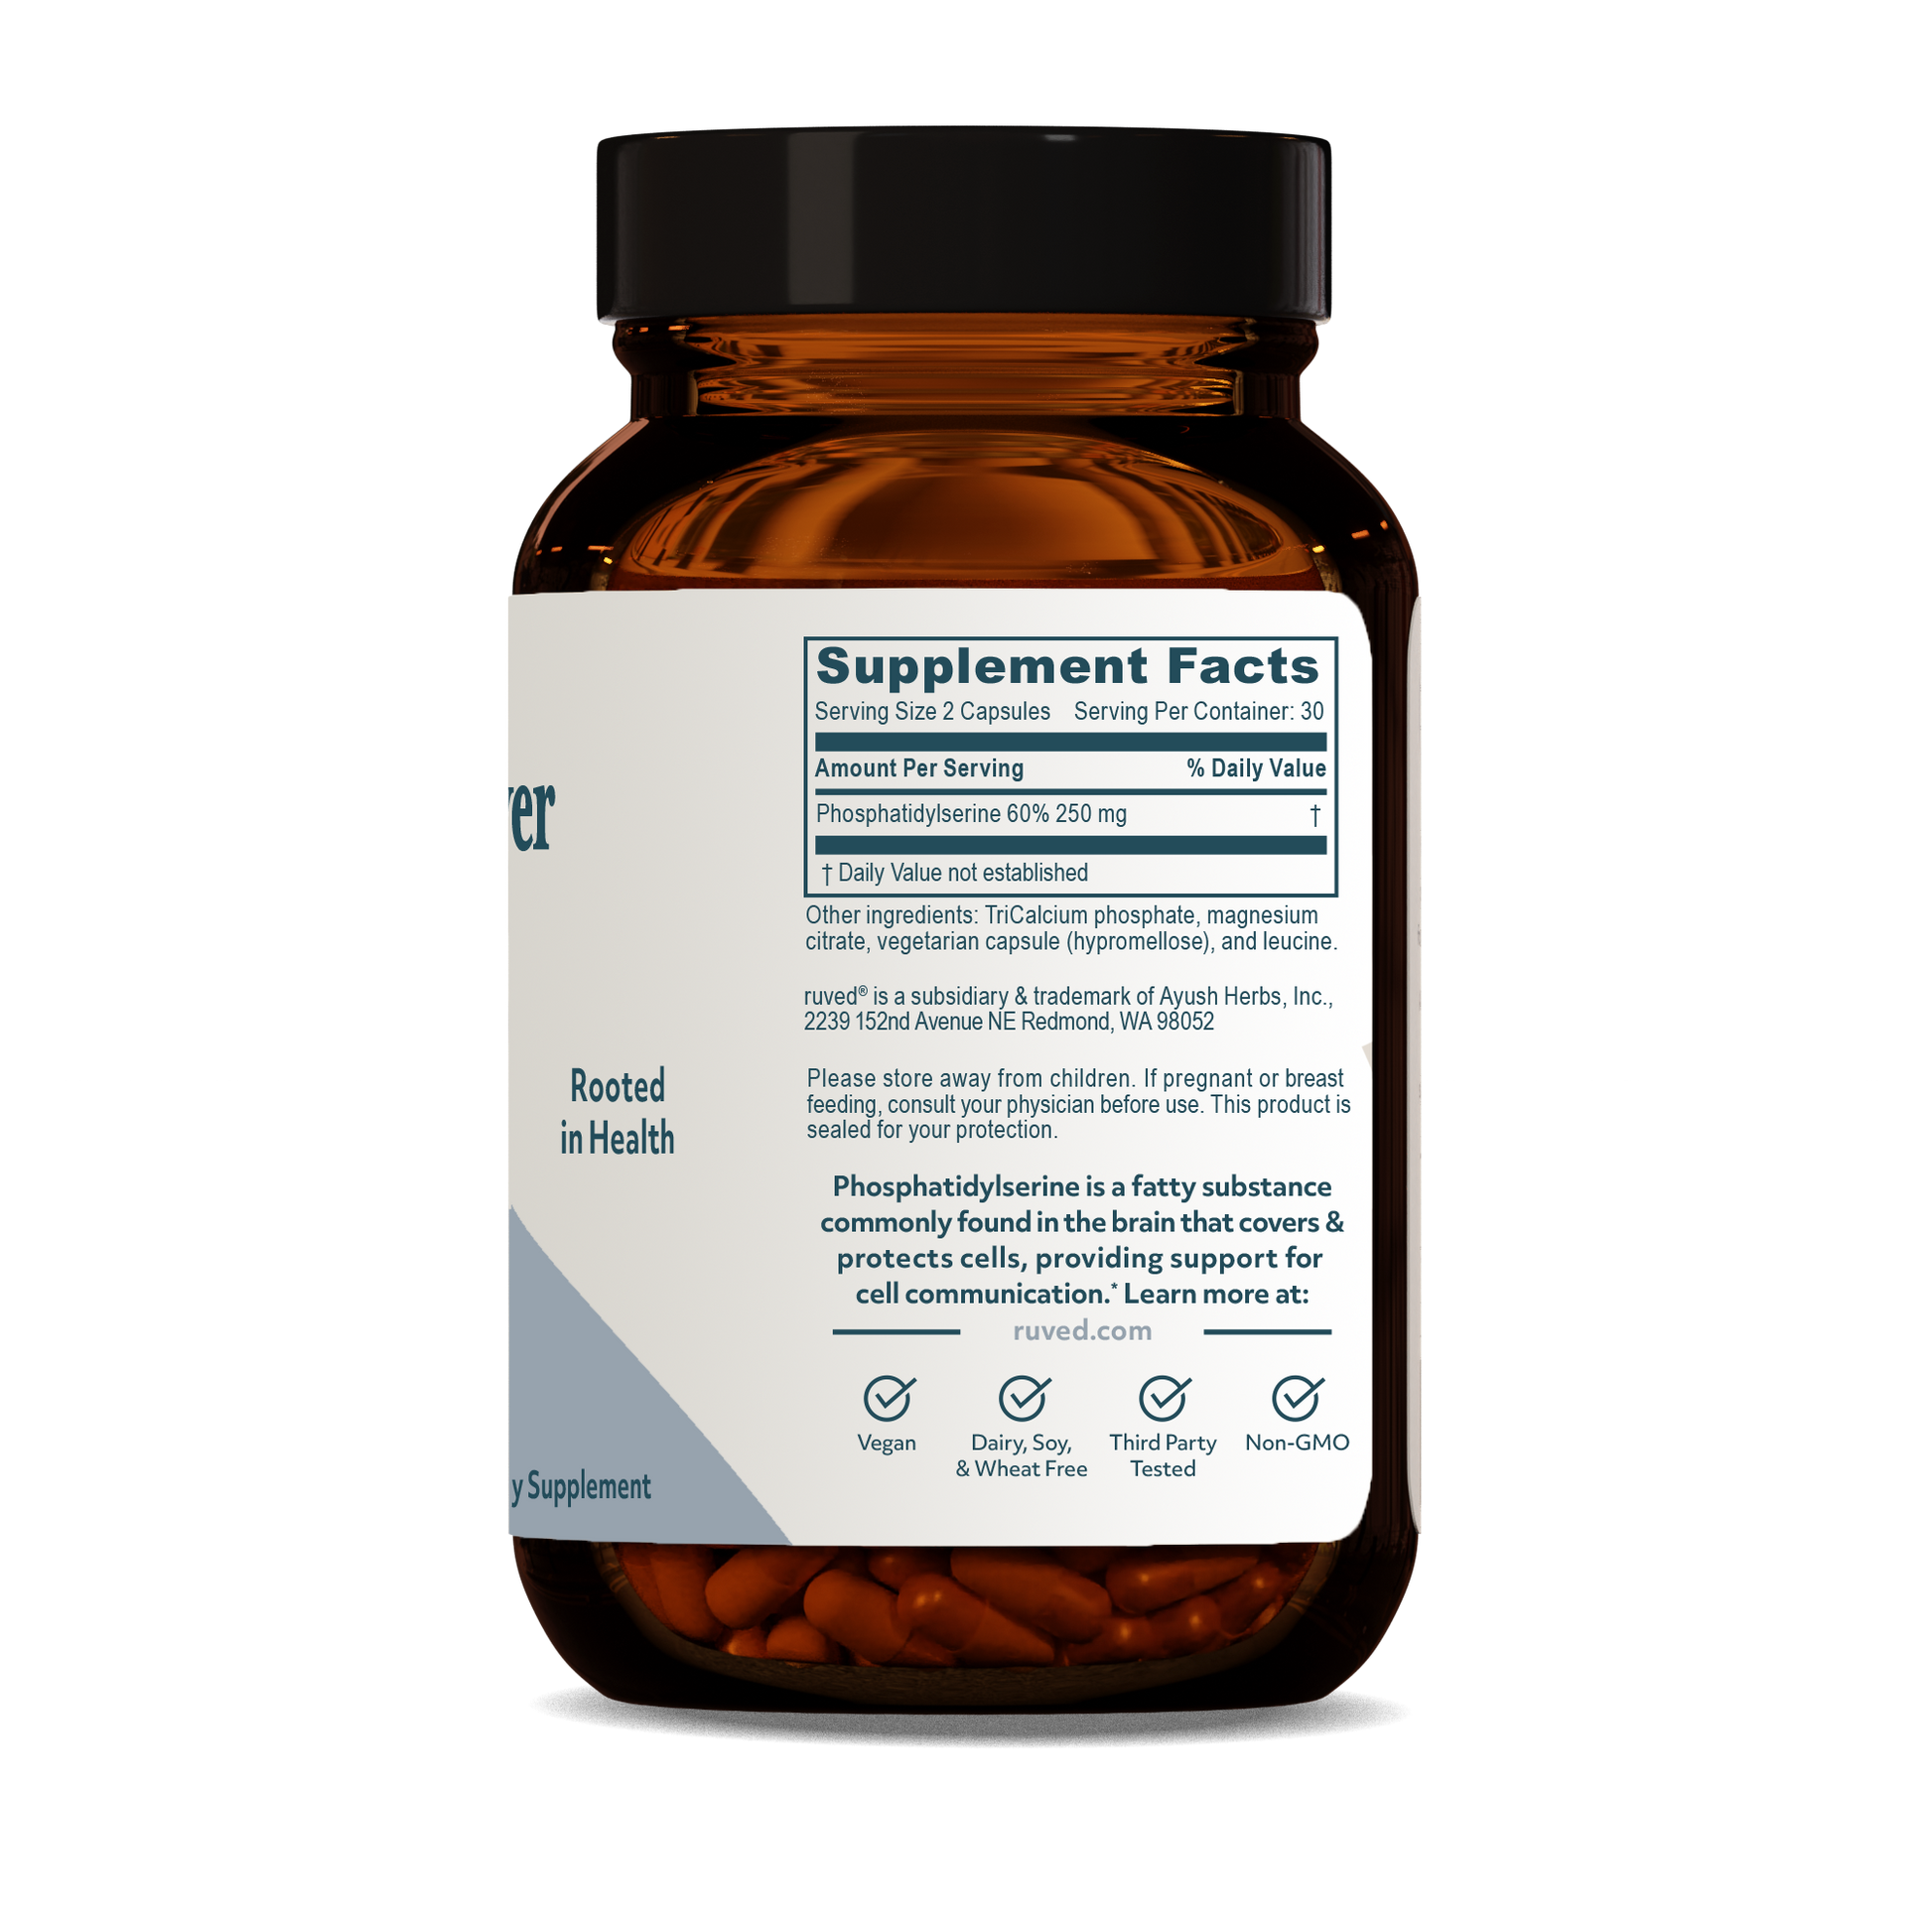 Phosphatidylserine Capsules Supplements Facts Side - Brain Health Supplement, 60 Softgel Capsules, Supports Cognitive Function and Memory.